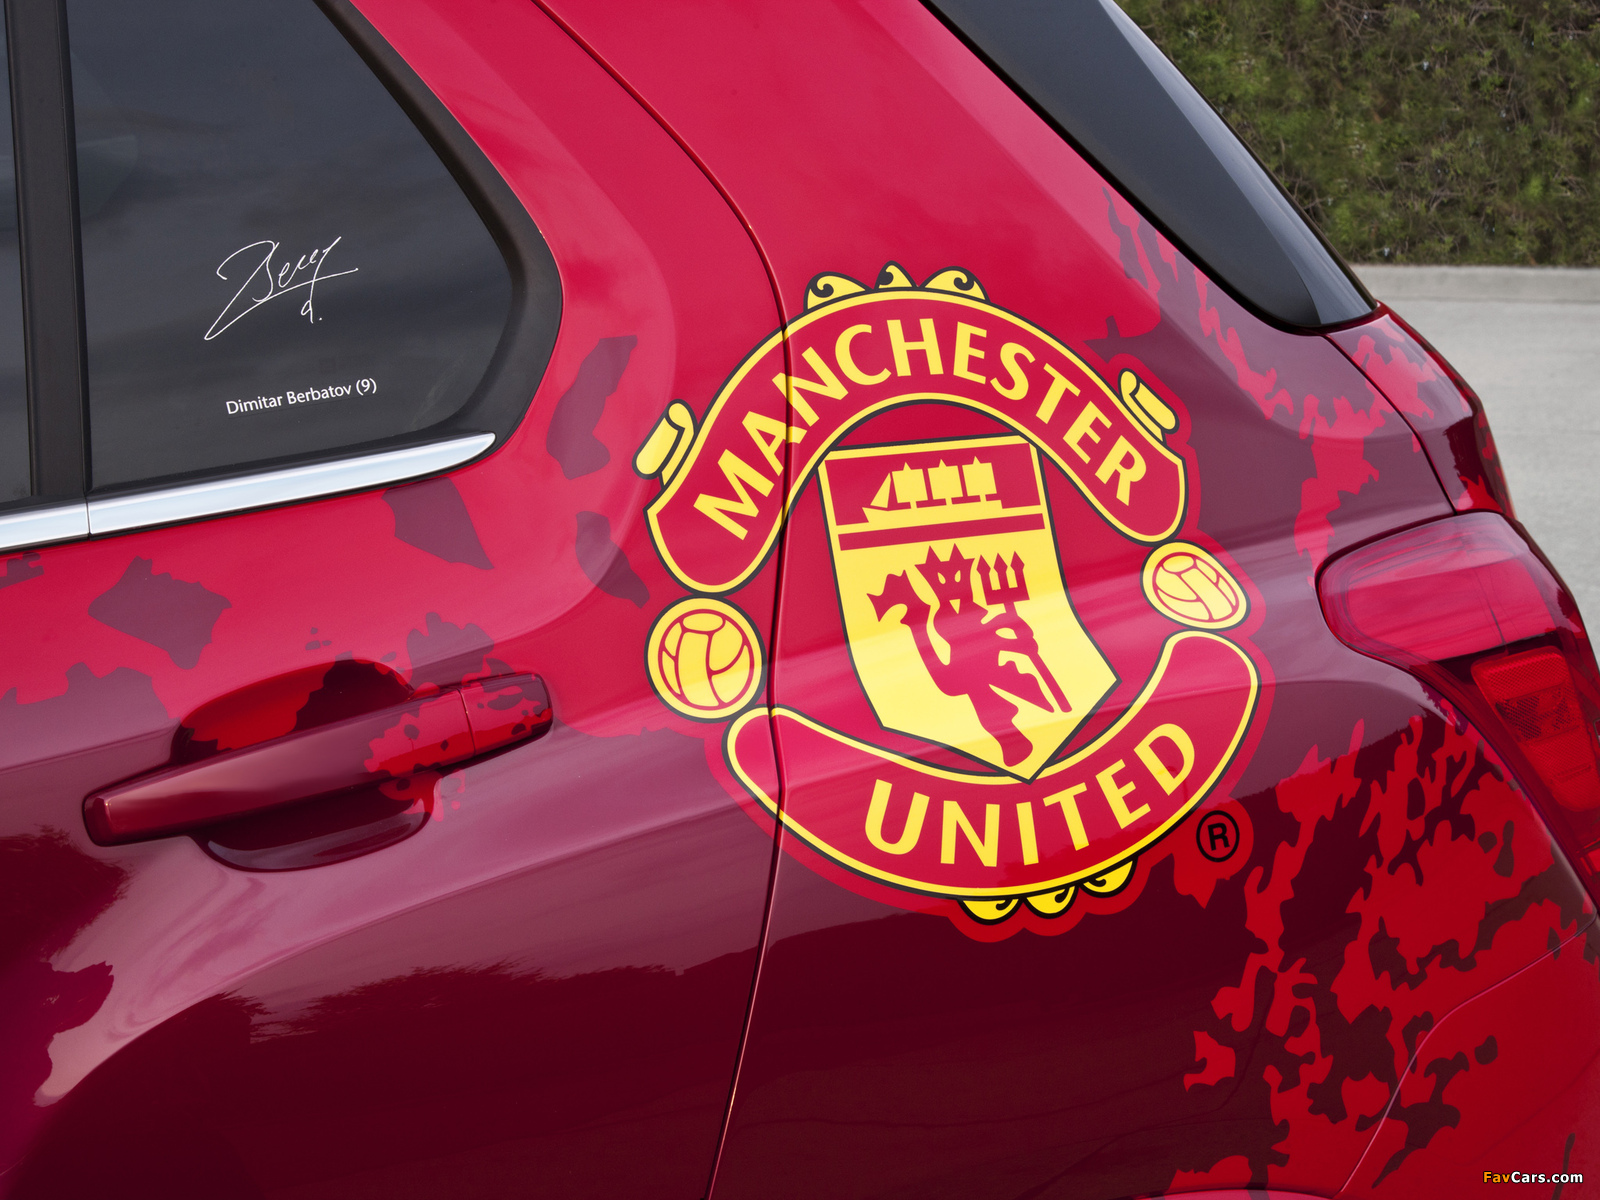 Chevrolet Trax Manchester United 2012 wallpapers (1600 x 1200)